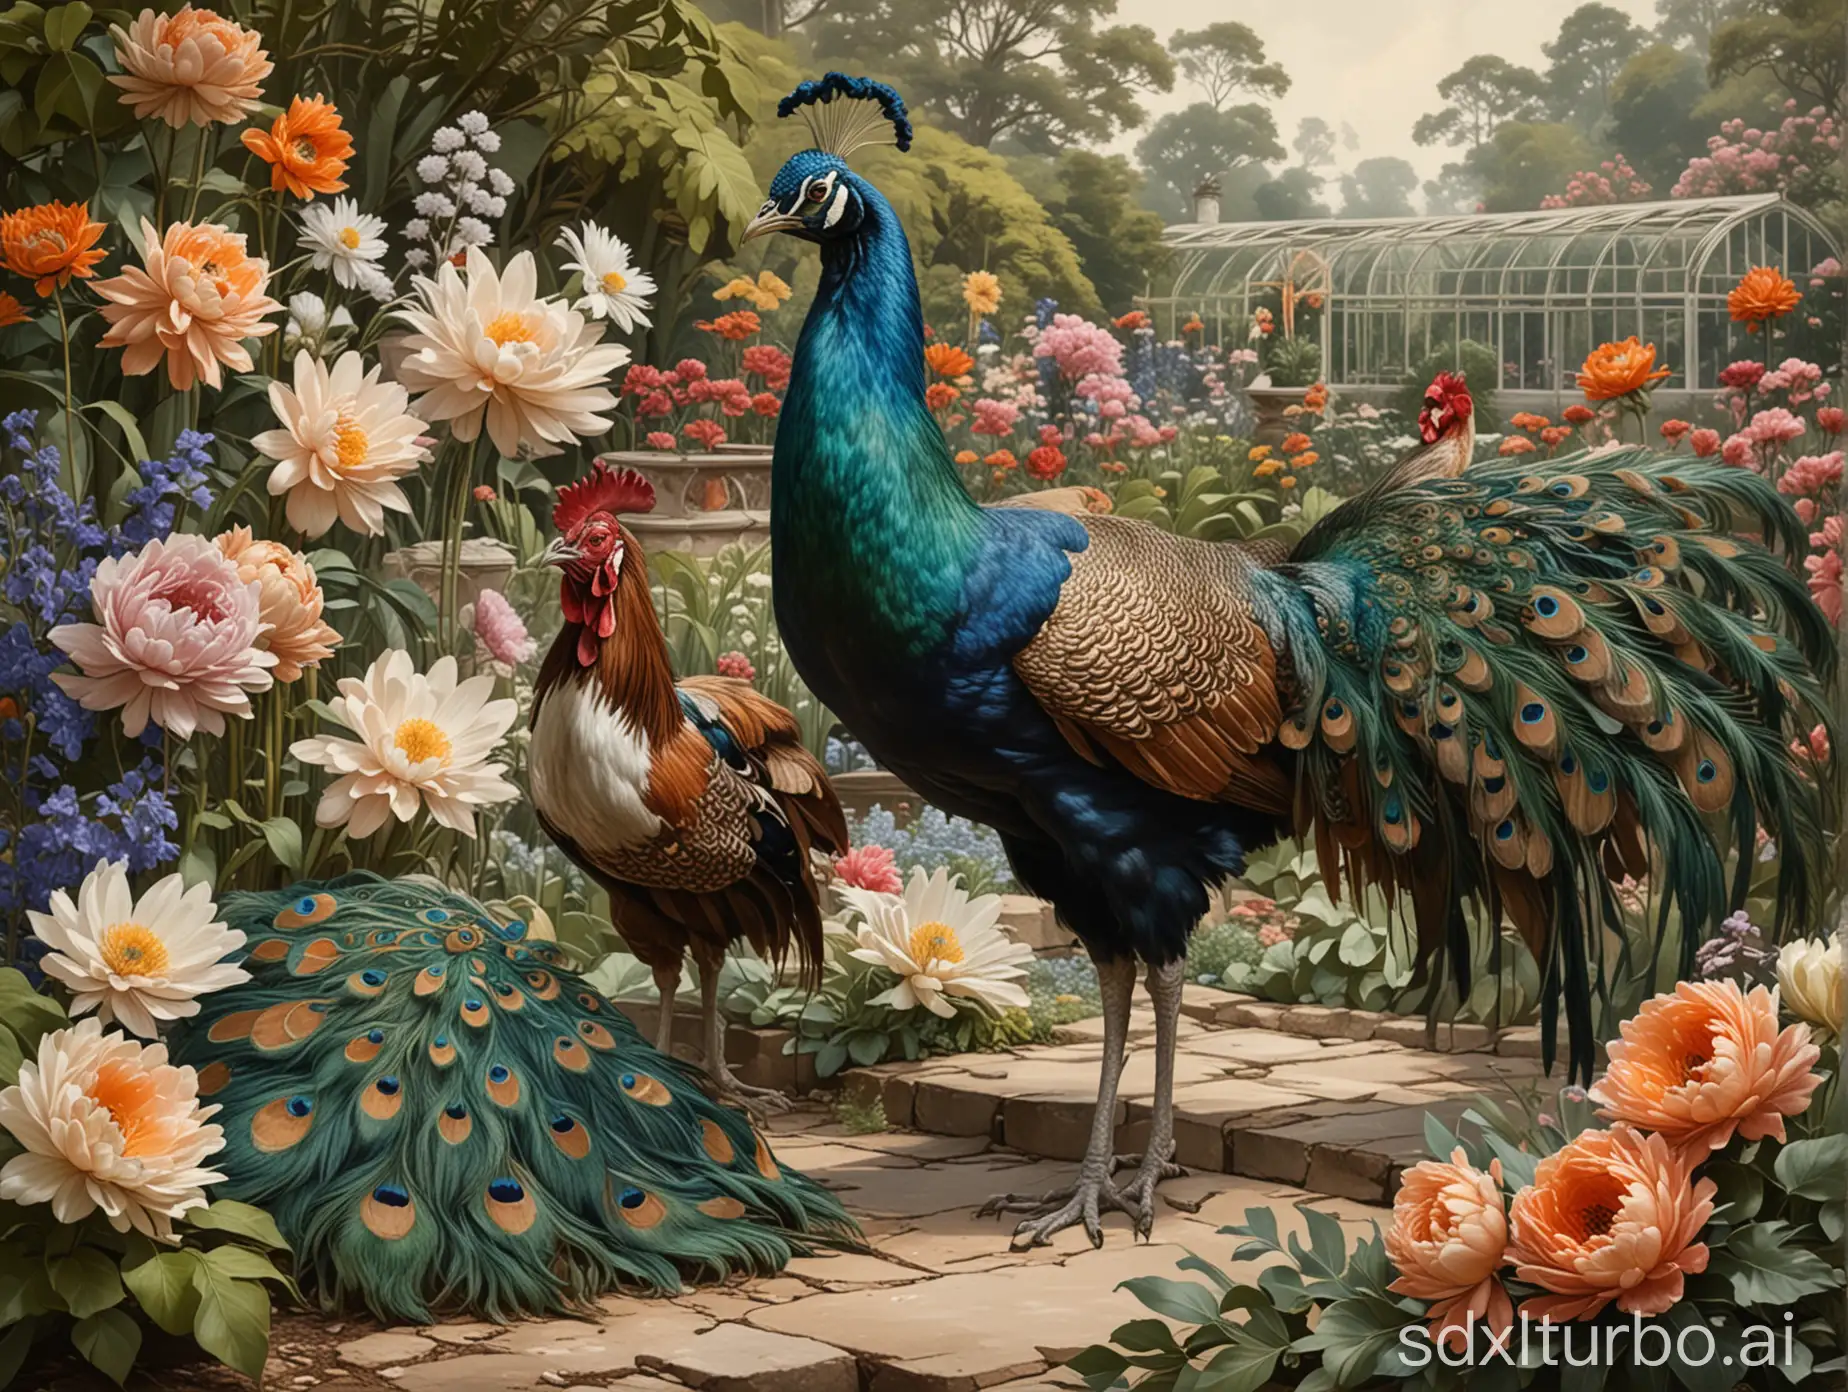 Vibrant-Peacock-and-Majestic-Rooster-in-Glasshouse-Flower-Garden